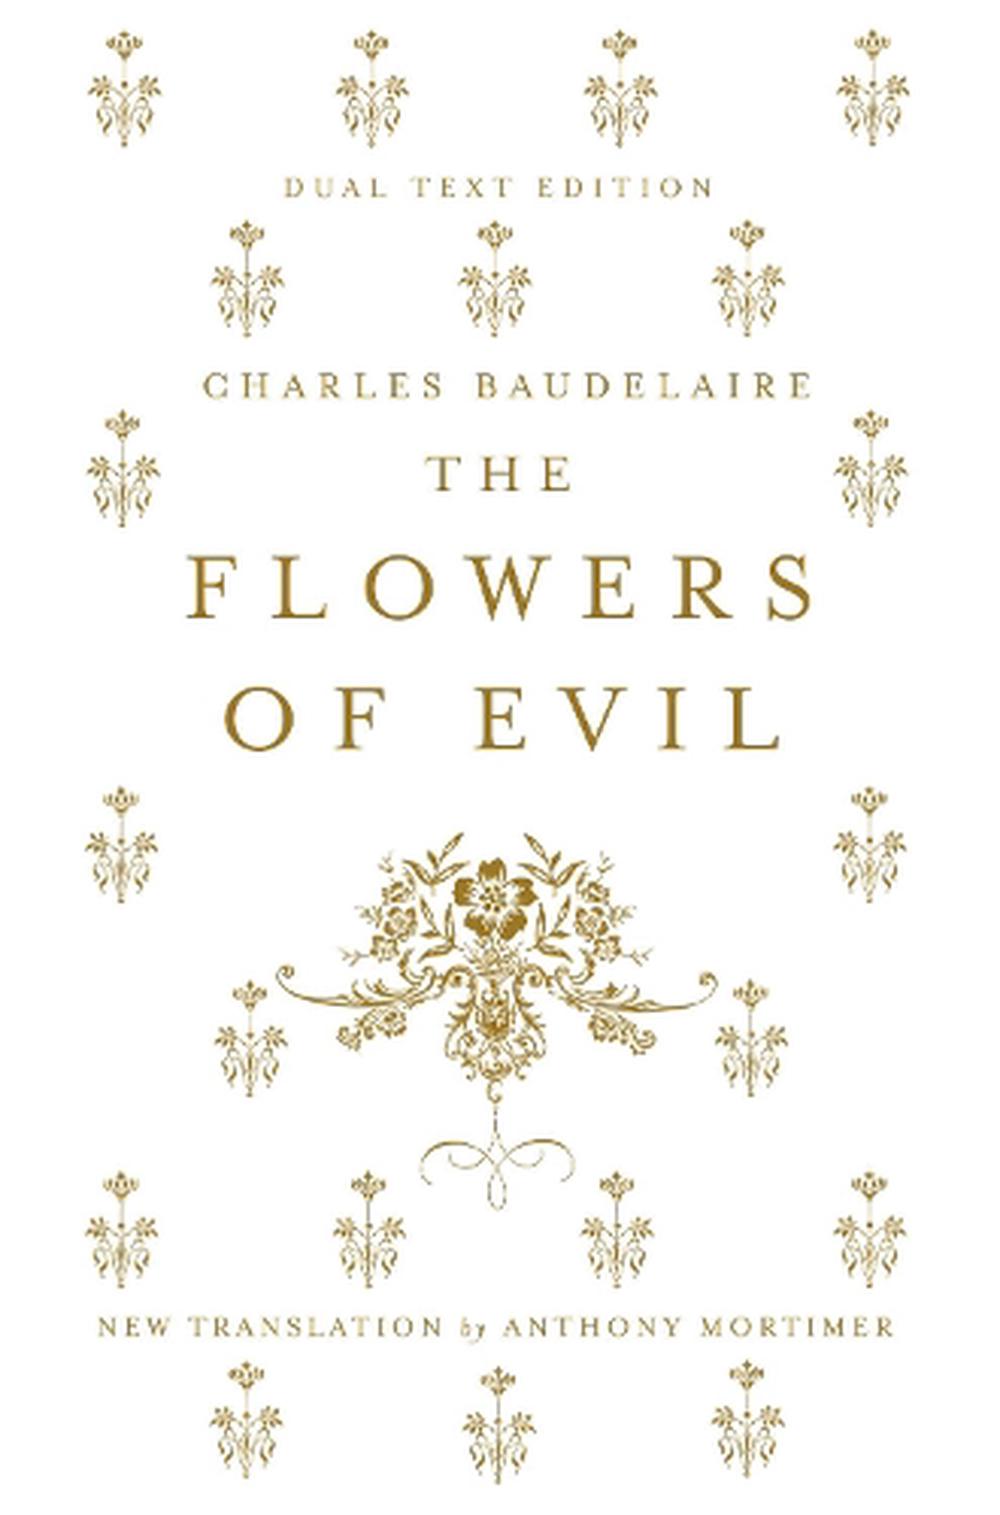 the flower of evil by charles baudelaire